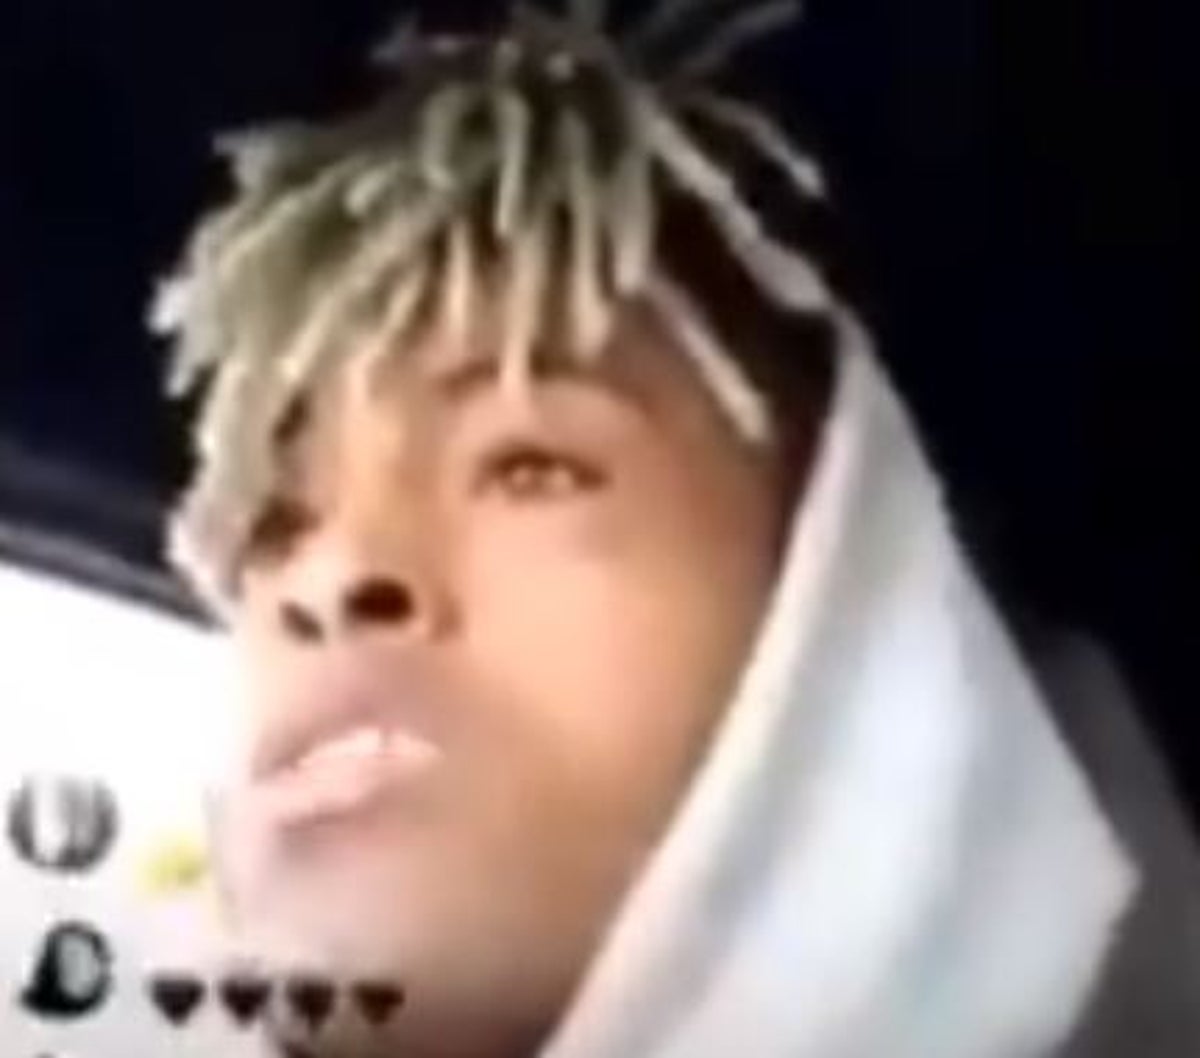 Xxxtentacion Dead Rapper Spoke Of His Tragic Death In Instagram Video Before Being Killed The Independent The Independent Another free people for beginners step by step drawing video tutorial. xxxtentacion dead rapper spoke of his